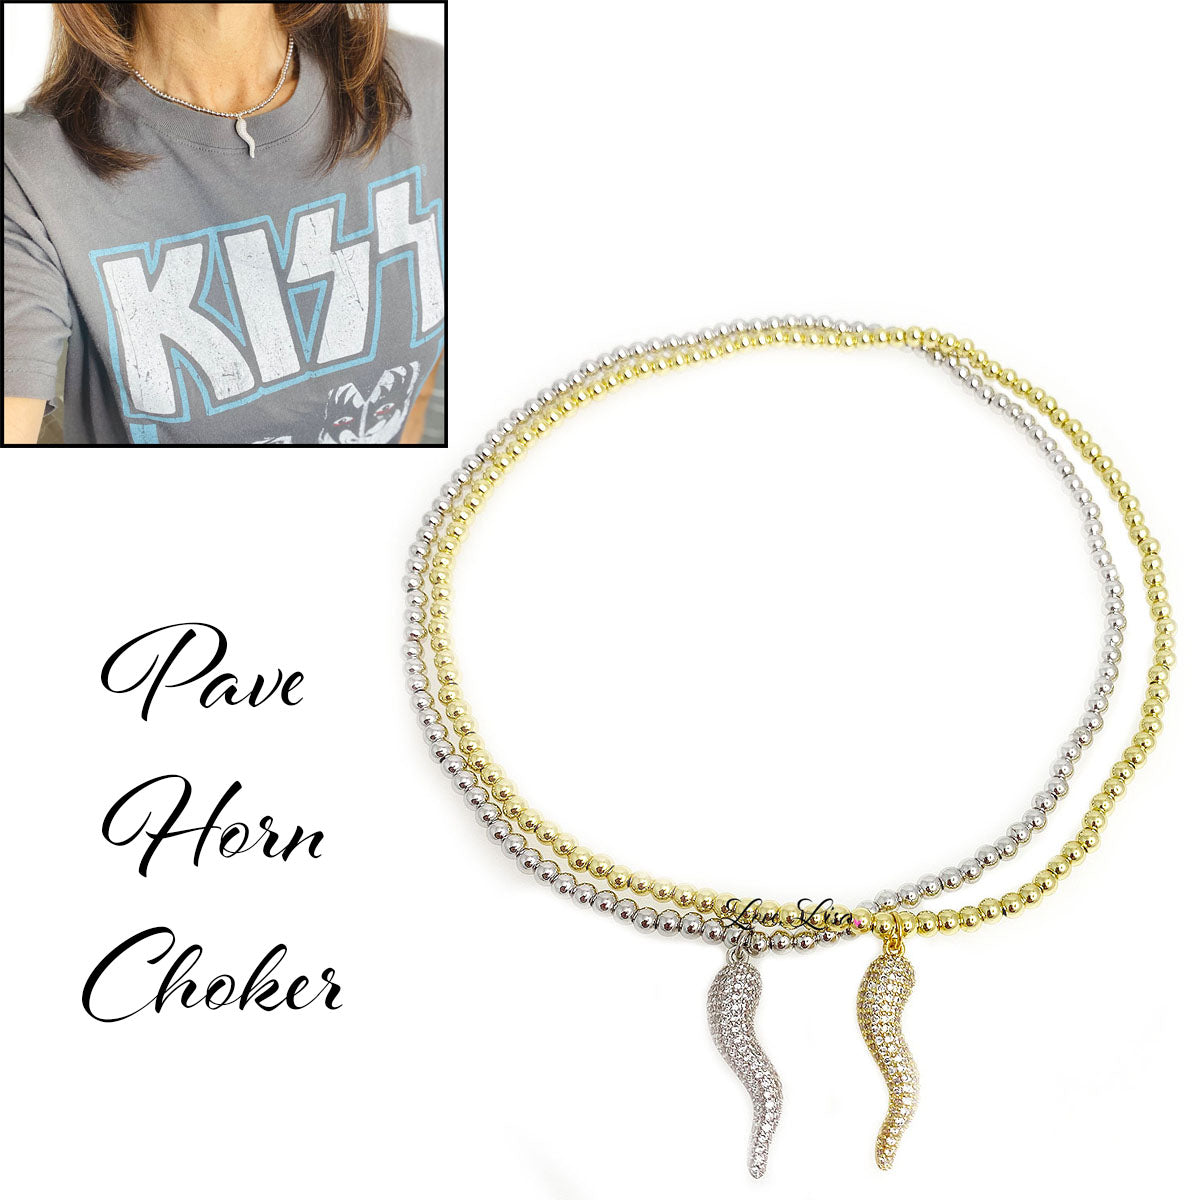 Simply Stunning Pave Horn Choker Necklace